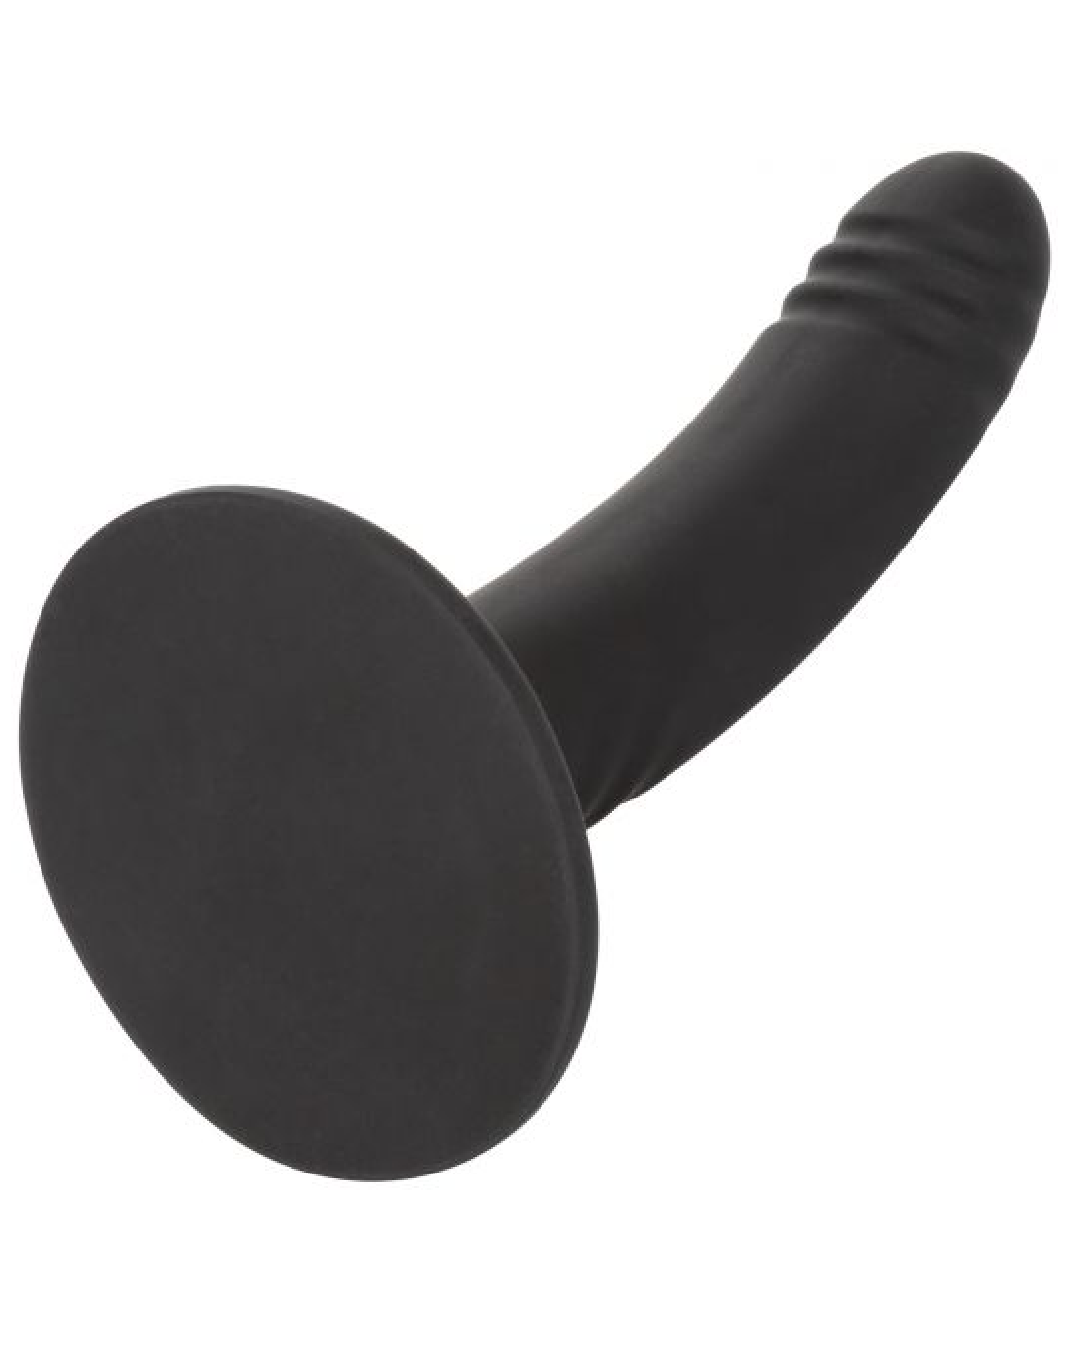 Boundless 6 Inch Ridged Silicone Dildo - Black tilted upwards with a focus on the suction cup base